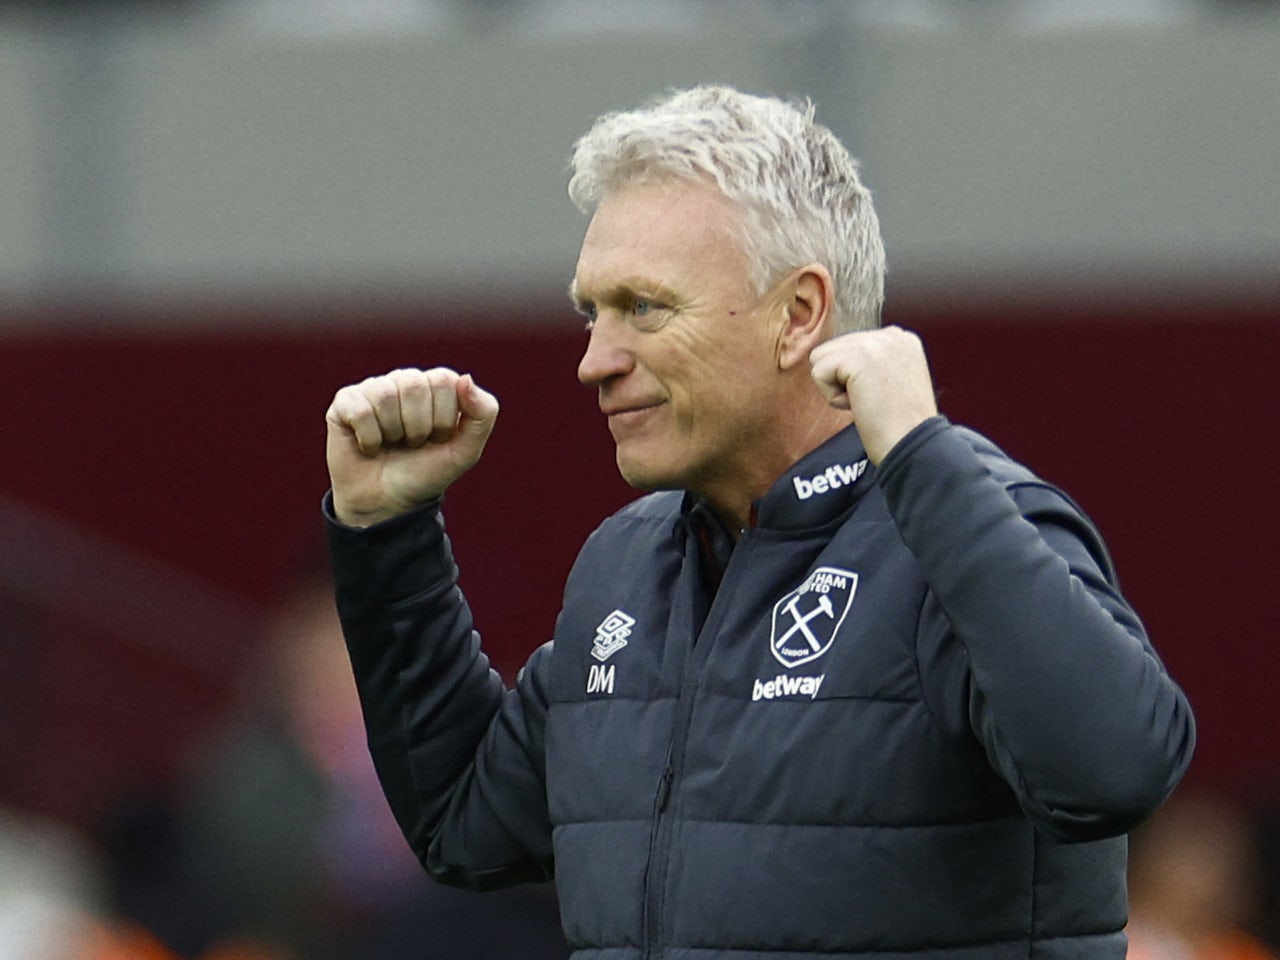 David Moyes 'set to sign new two-and-a-half year West Ham United contract'